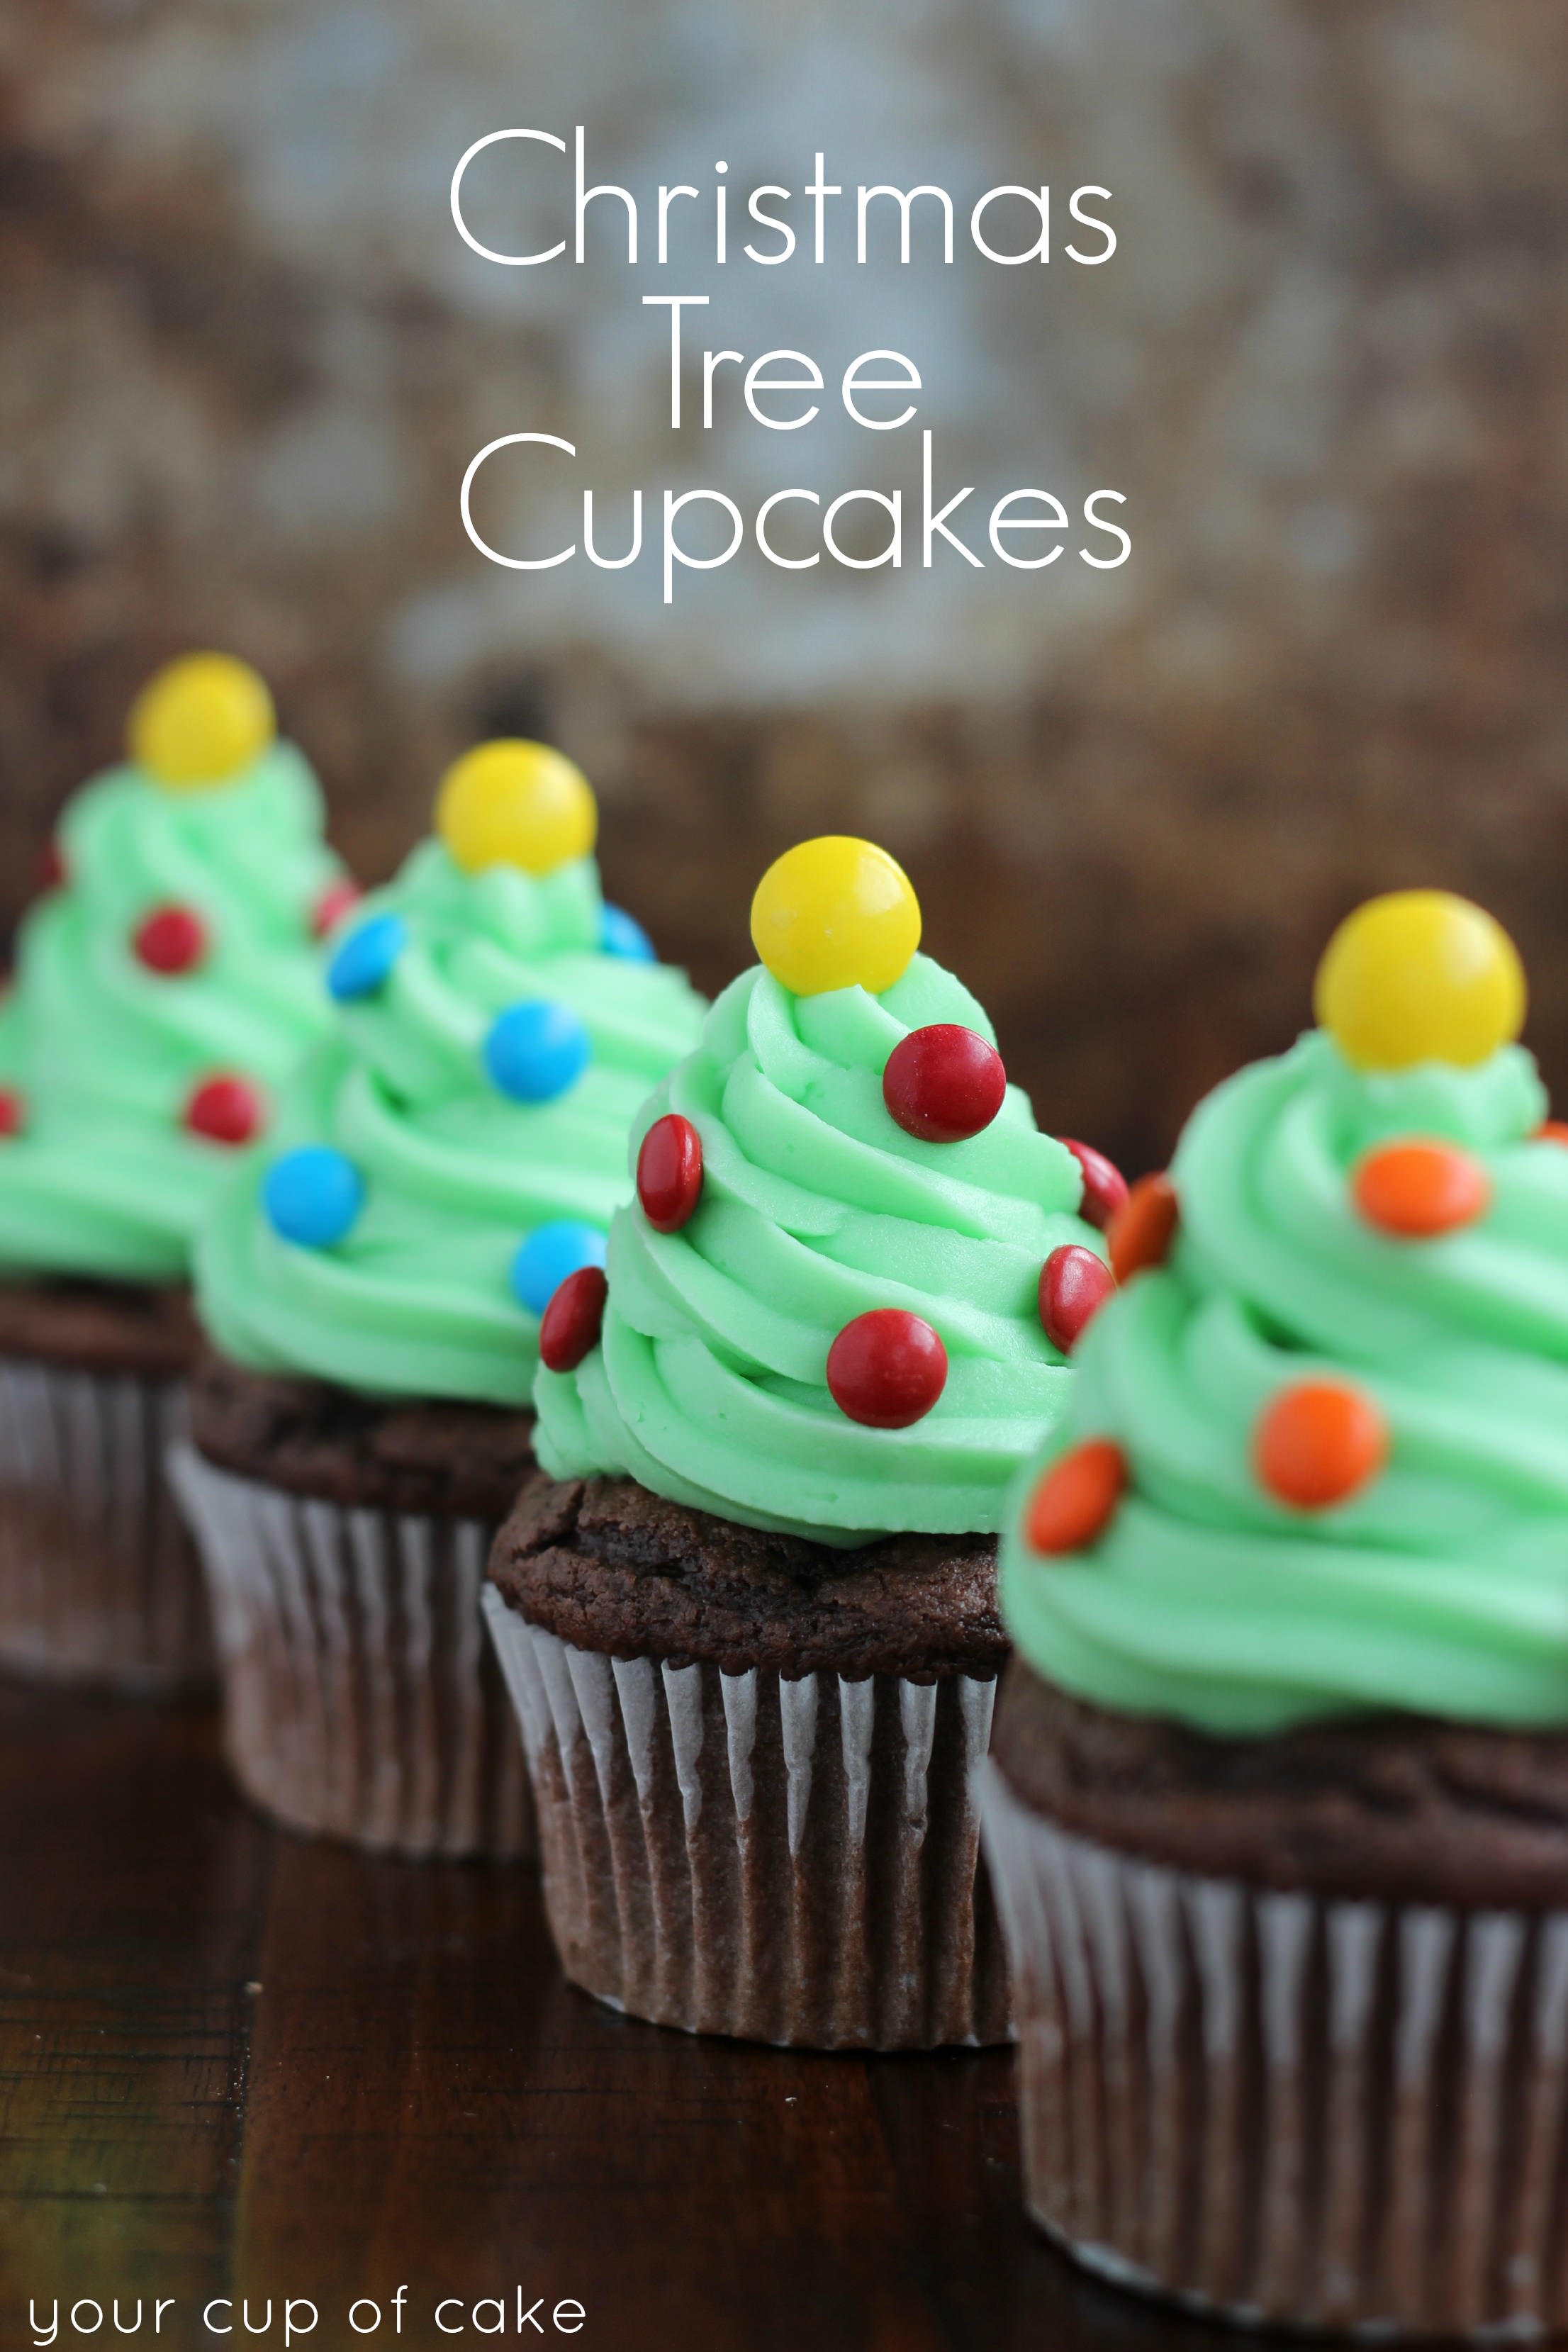 Easy Cupcake Decorating for Christmas | Your Cup of Cake